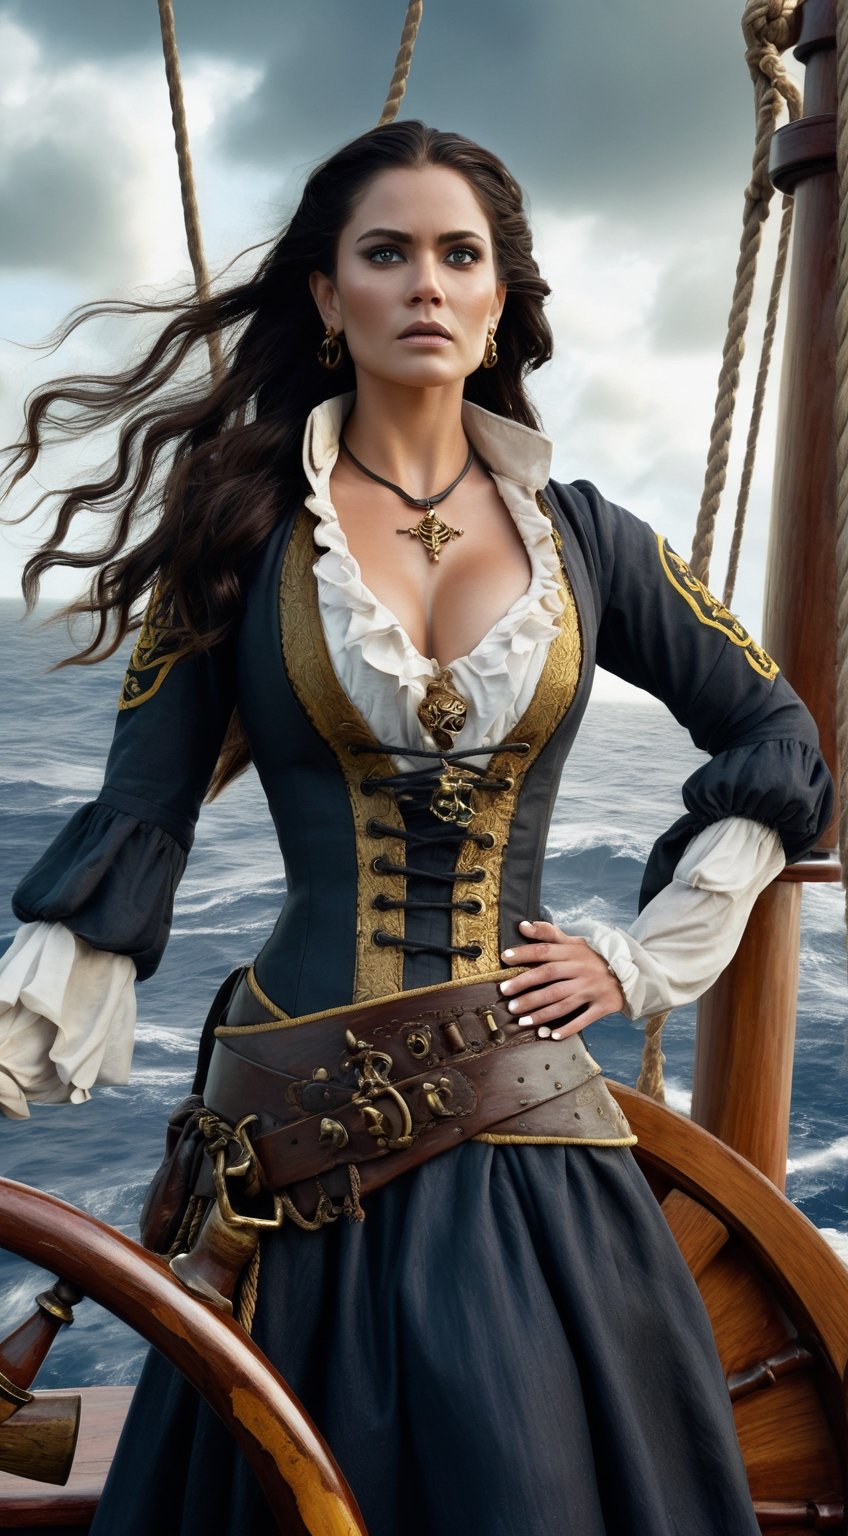 A beautiful woman with long, dark hair, wearing an elegant pirate outfit adorned with golden details, stands on the deck of a majestic pirate ship. Her eyes reflect determination as she confidently steers the helm, directing the vessel towards a mysterious portal shimmering brightly on the horizon. The ship is surrounded by choppy waves, and the sky is filled with dark clouds, yet the woman exhibits a bold serenity as she sails into the unknown. The ship is decorated with skulls and tattered sails, giving a sense of adventure and danger. {{The ship appears ancient yet sturdy}}, {{woman with a determined expression}}, {{bright portal on the horizon}}. ((every detail of the body is perfectly designed)), ((professional image)), ((image with intricate details)), ((high-quality image)), ((wide view))